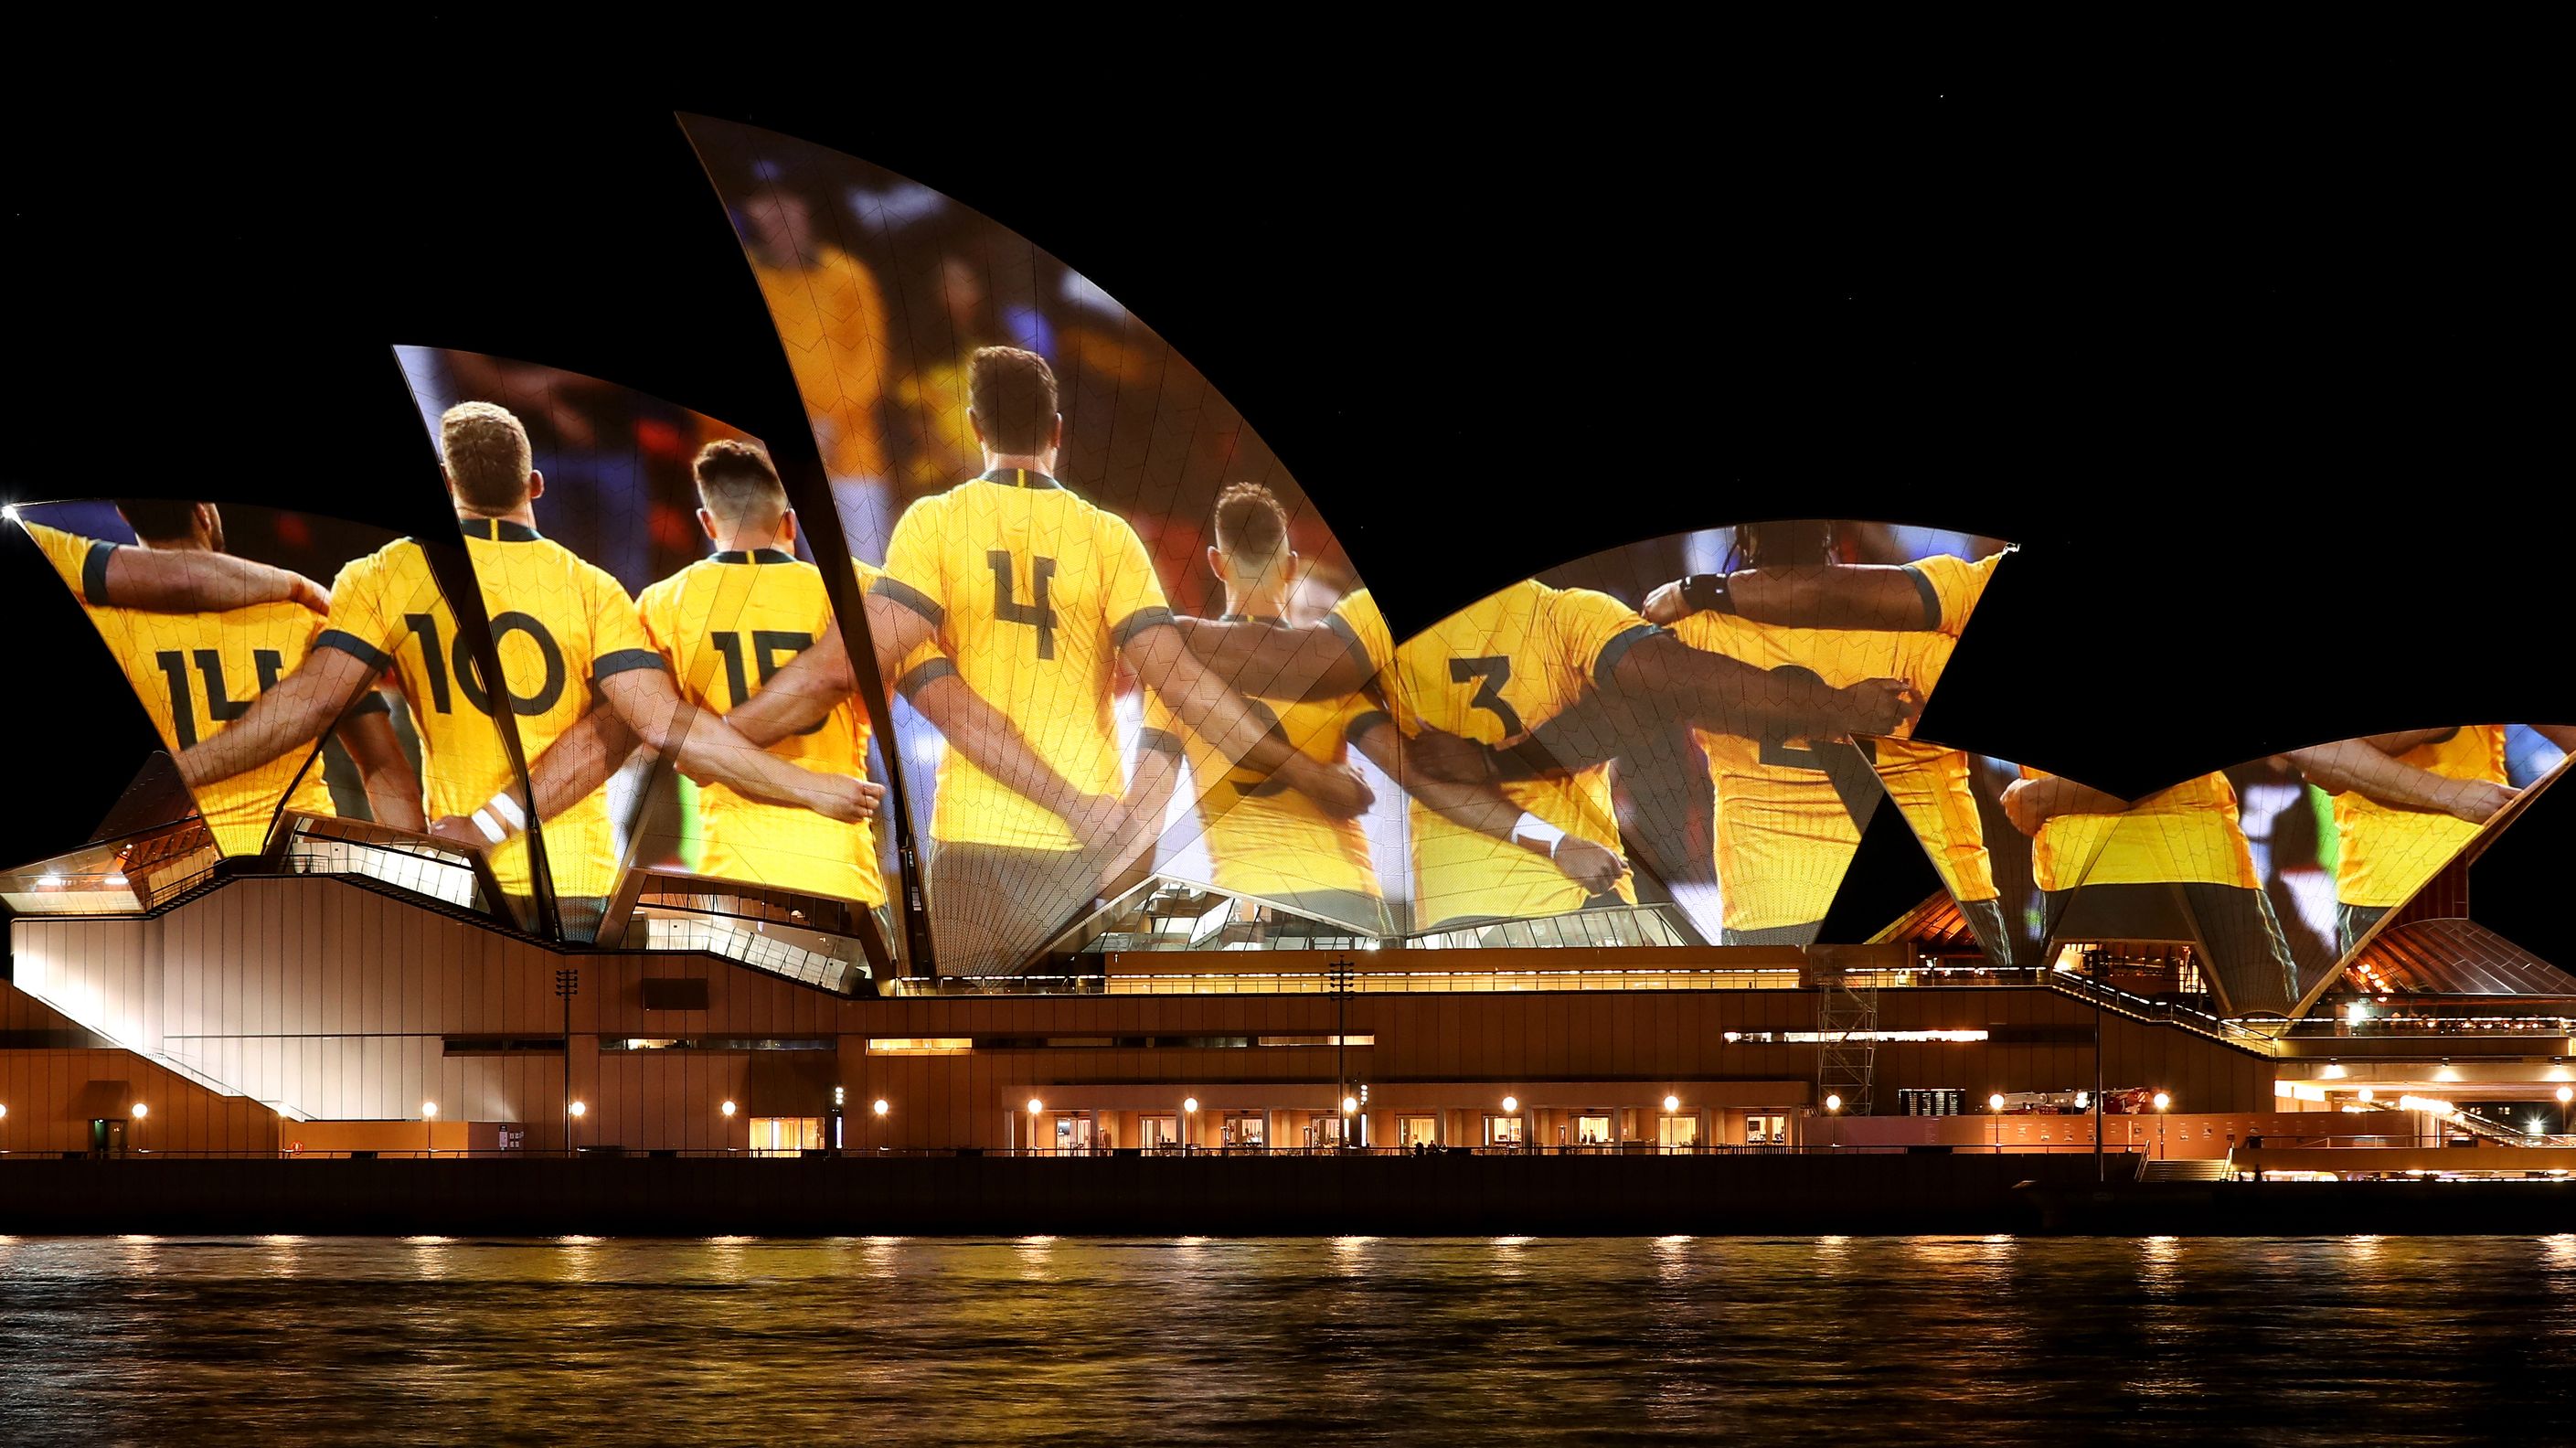 Australia set to host 2027 Rugby World Cup